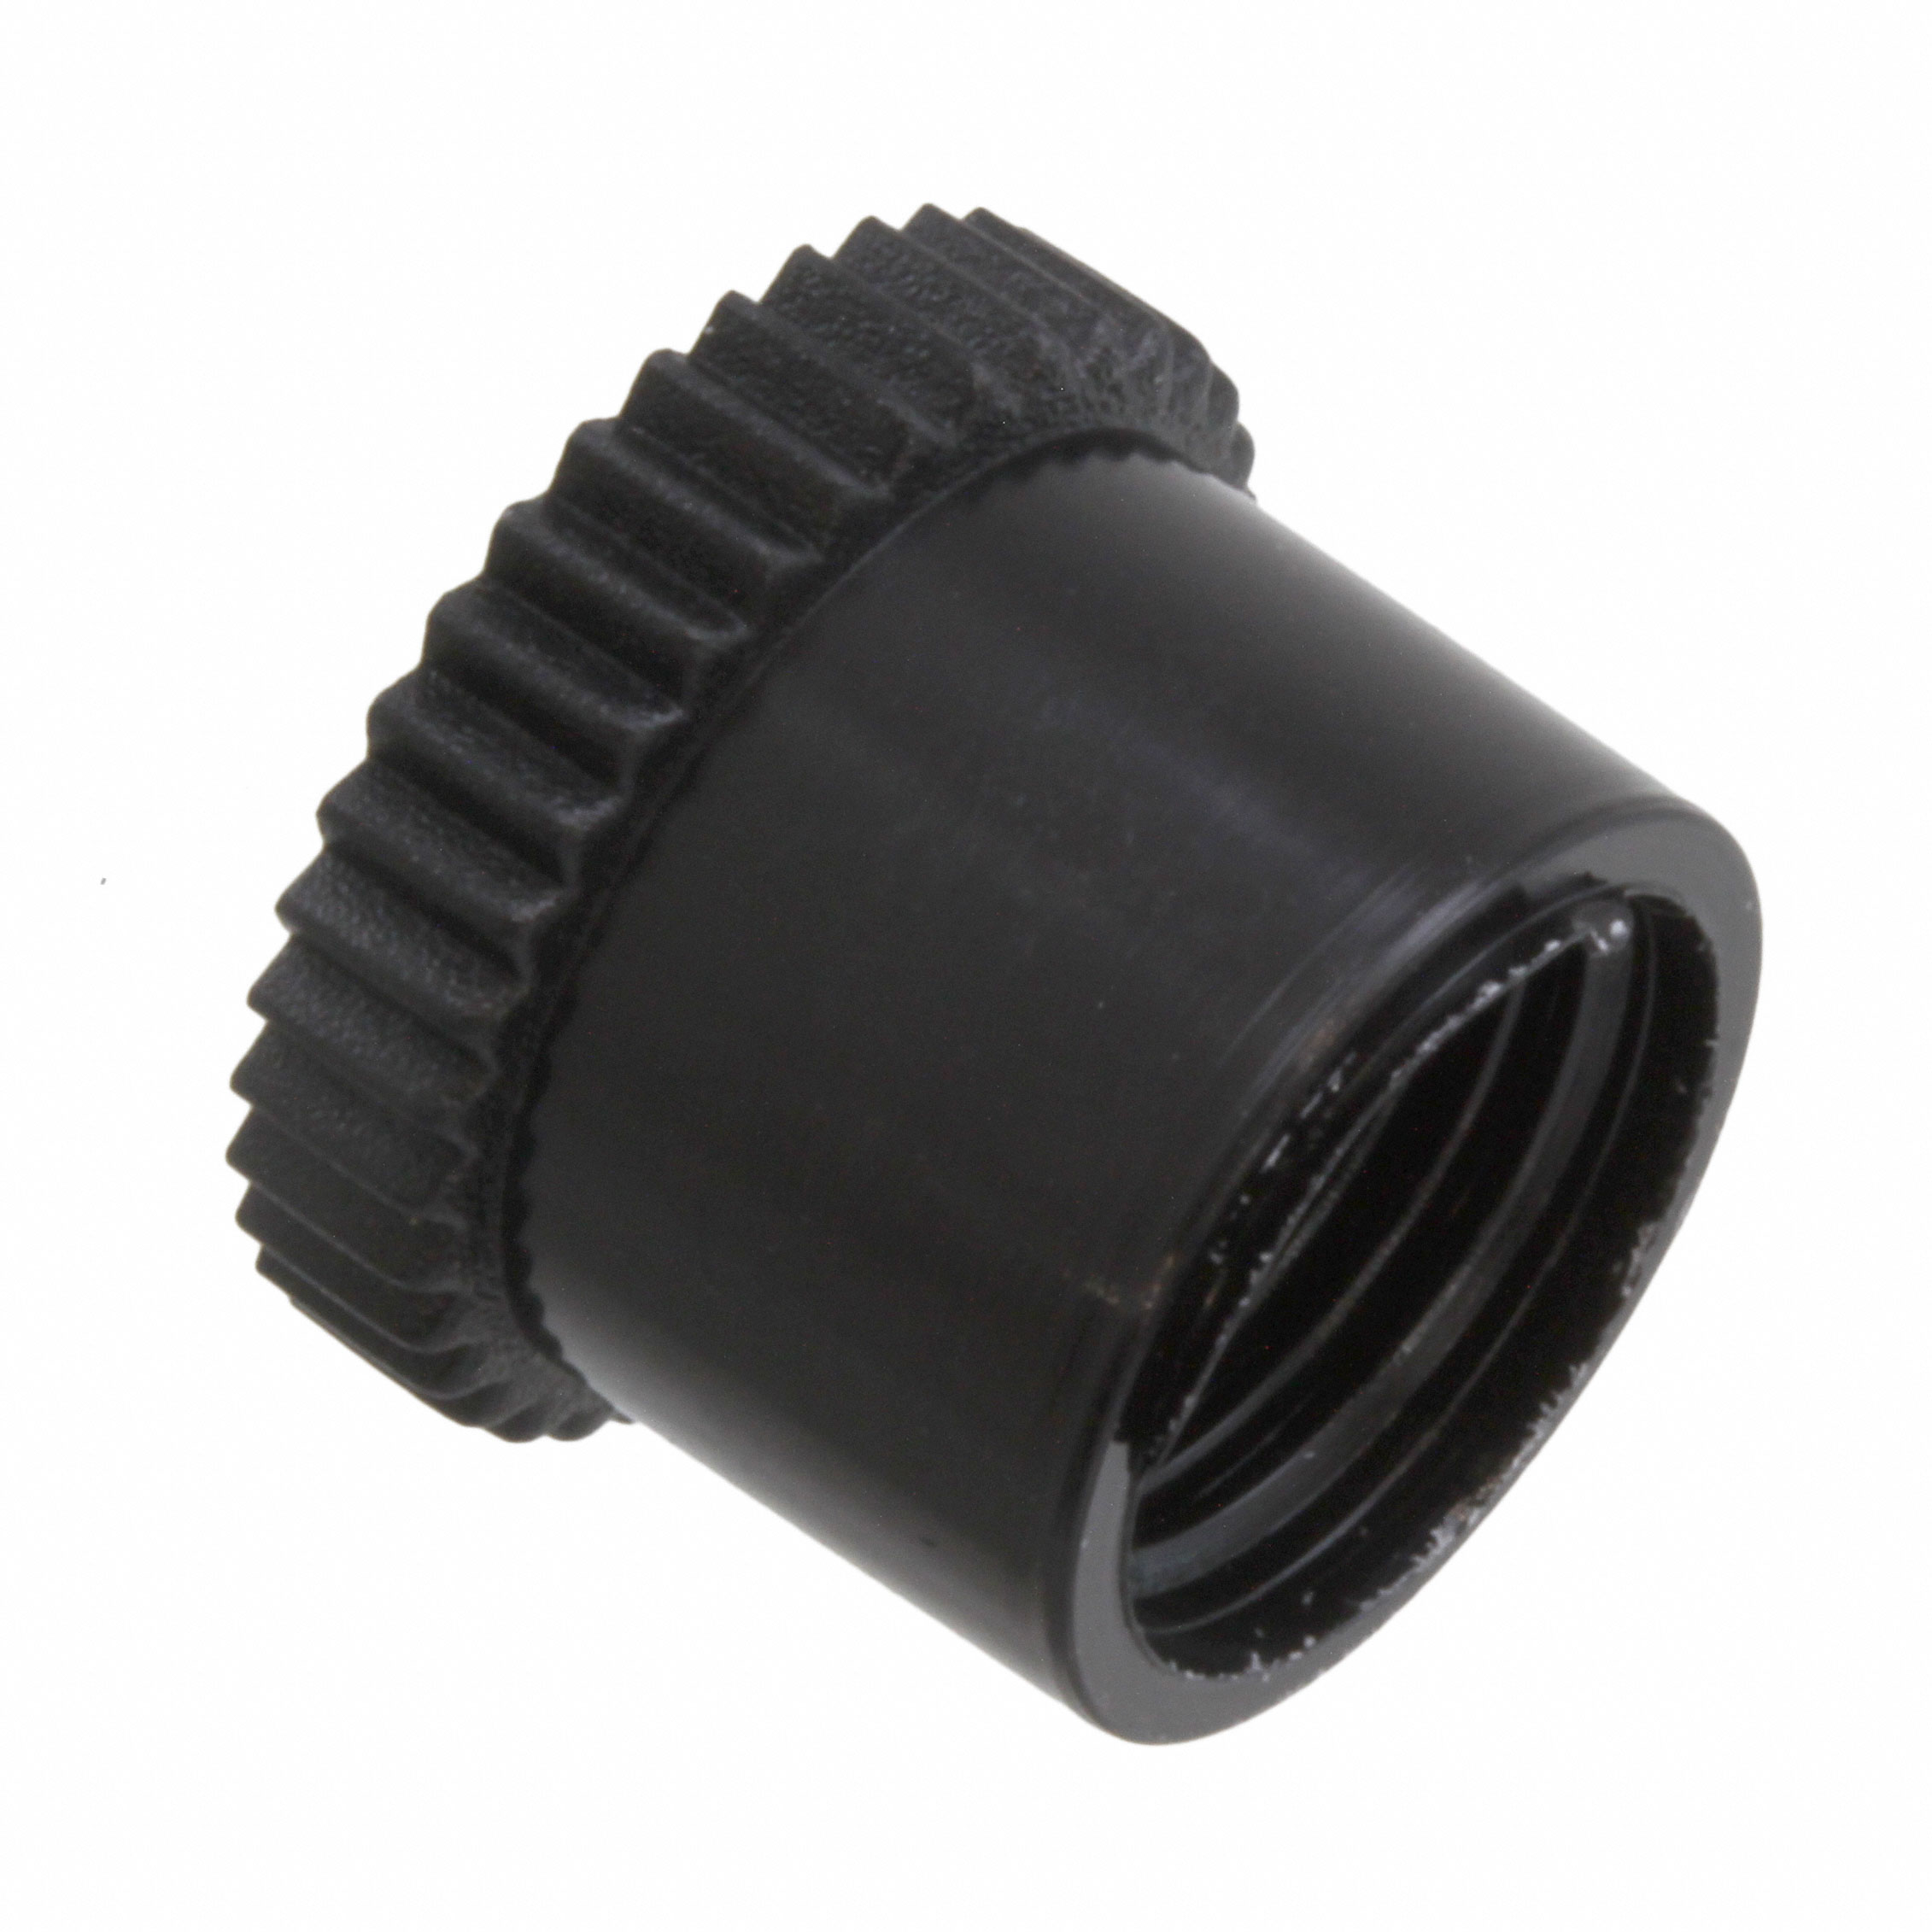 【EFA02-03-002】DUST CAP FOR FC ADAPTERS